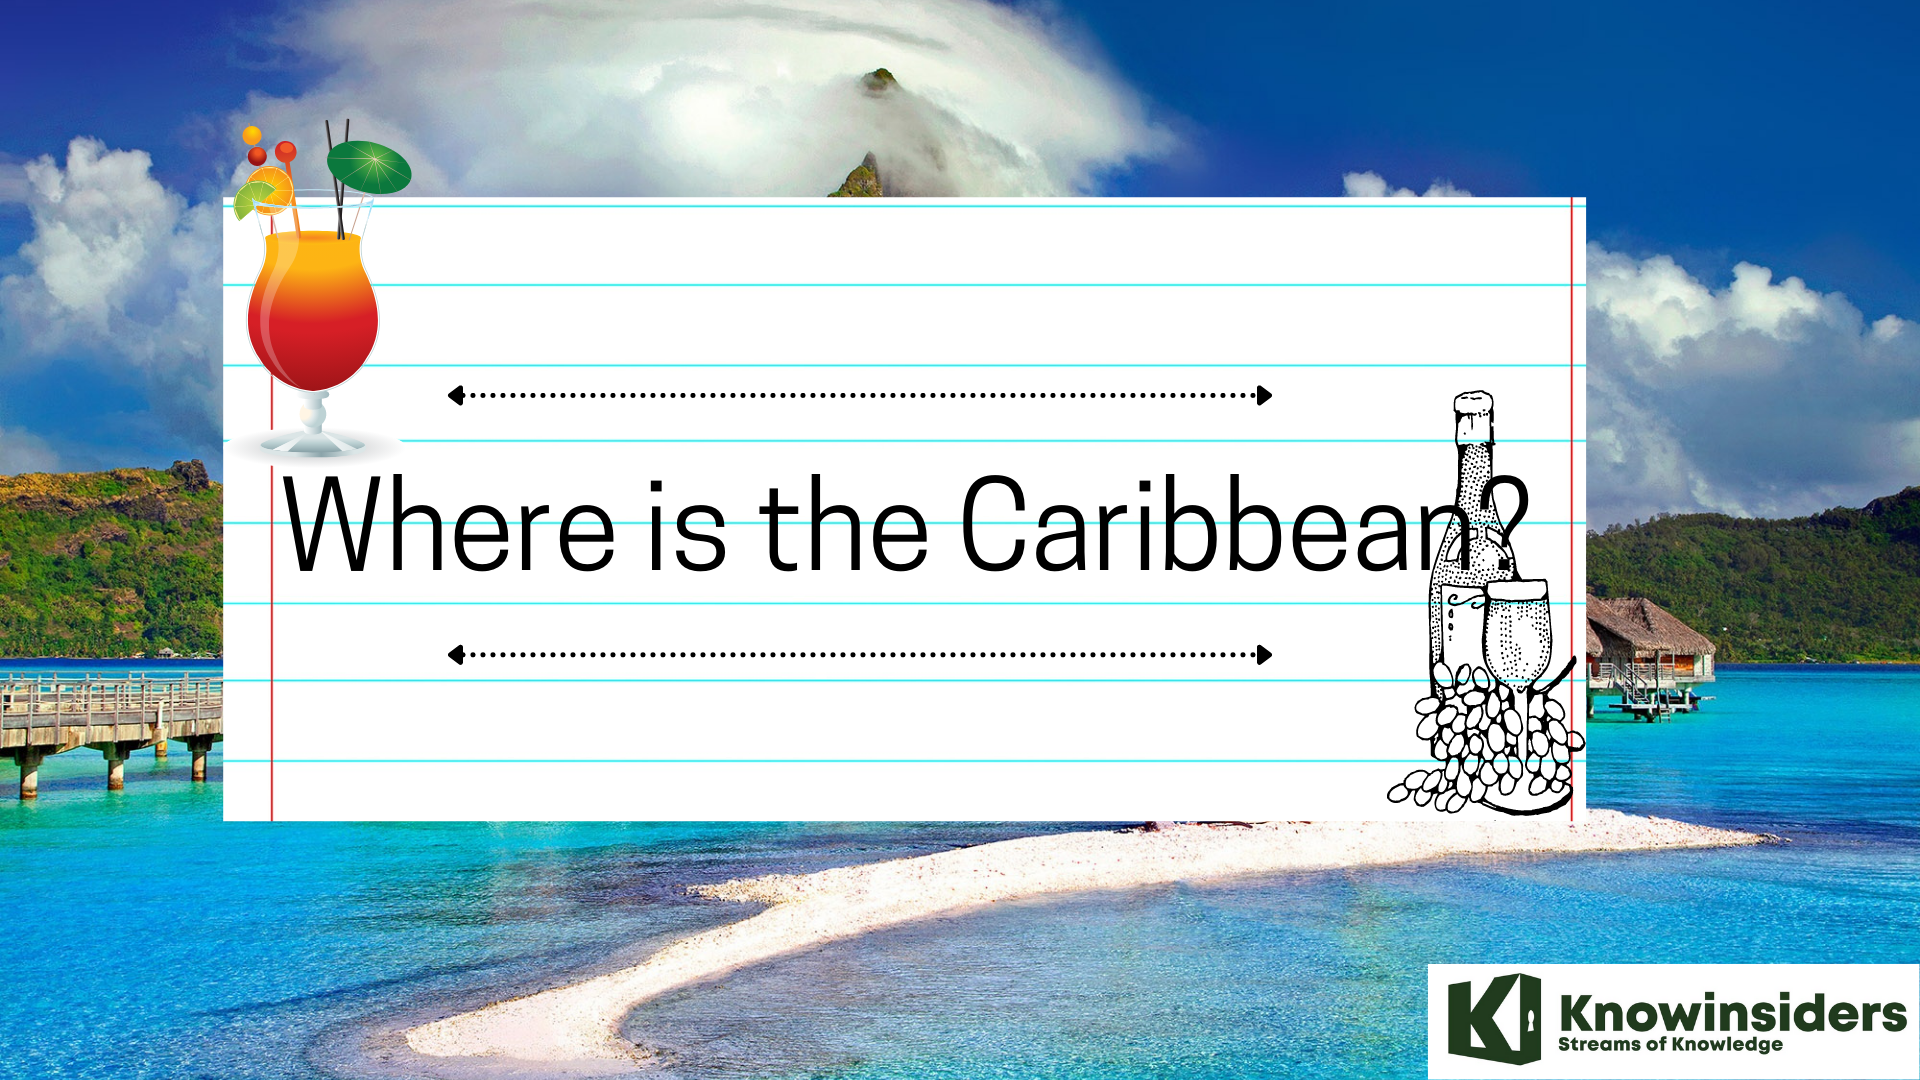 Where is the Caribbean?